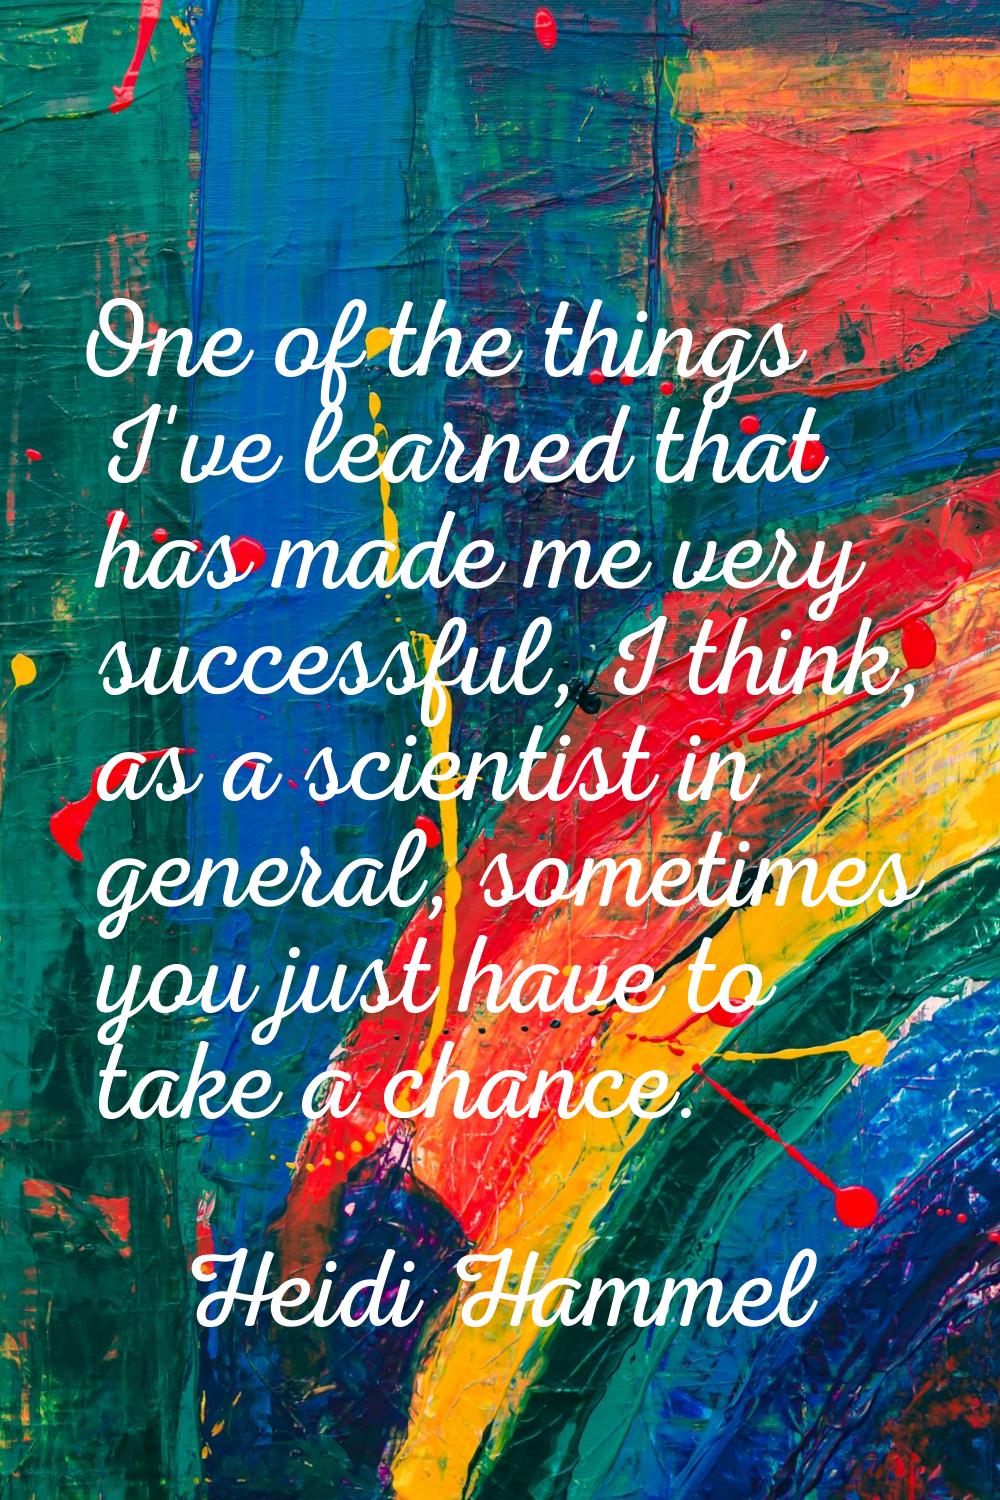 One of the things I've learned that has made me very successful, I think, as a scientist in general